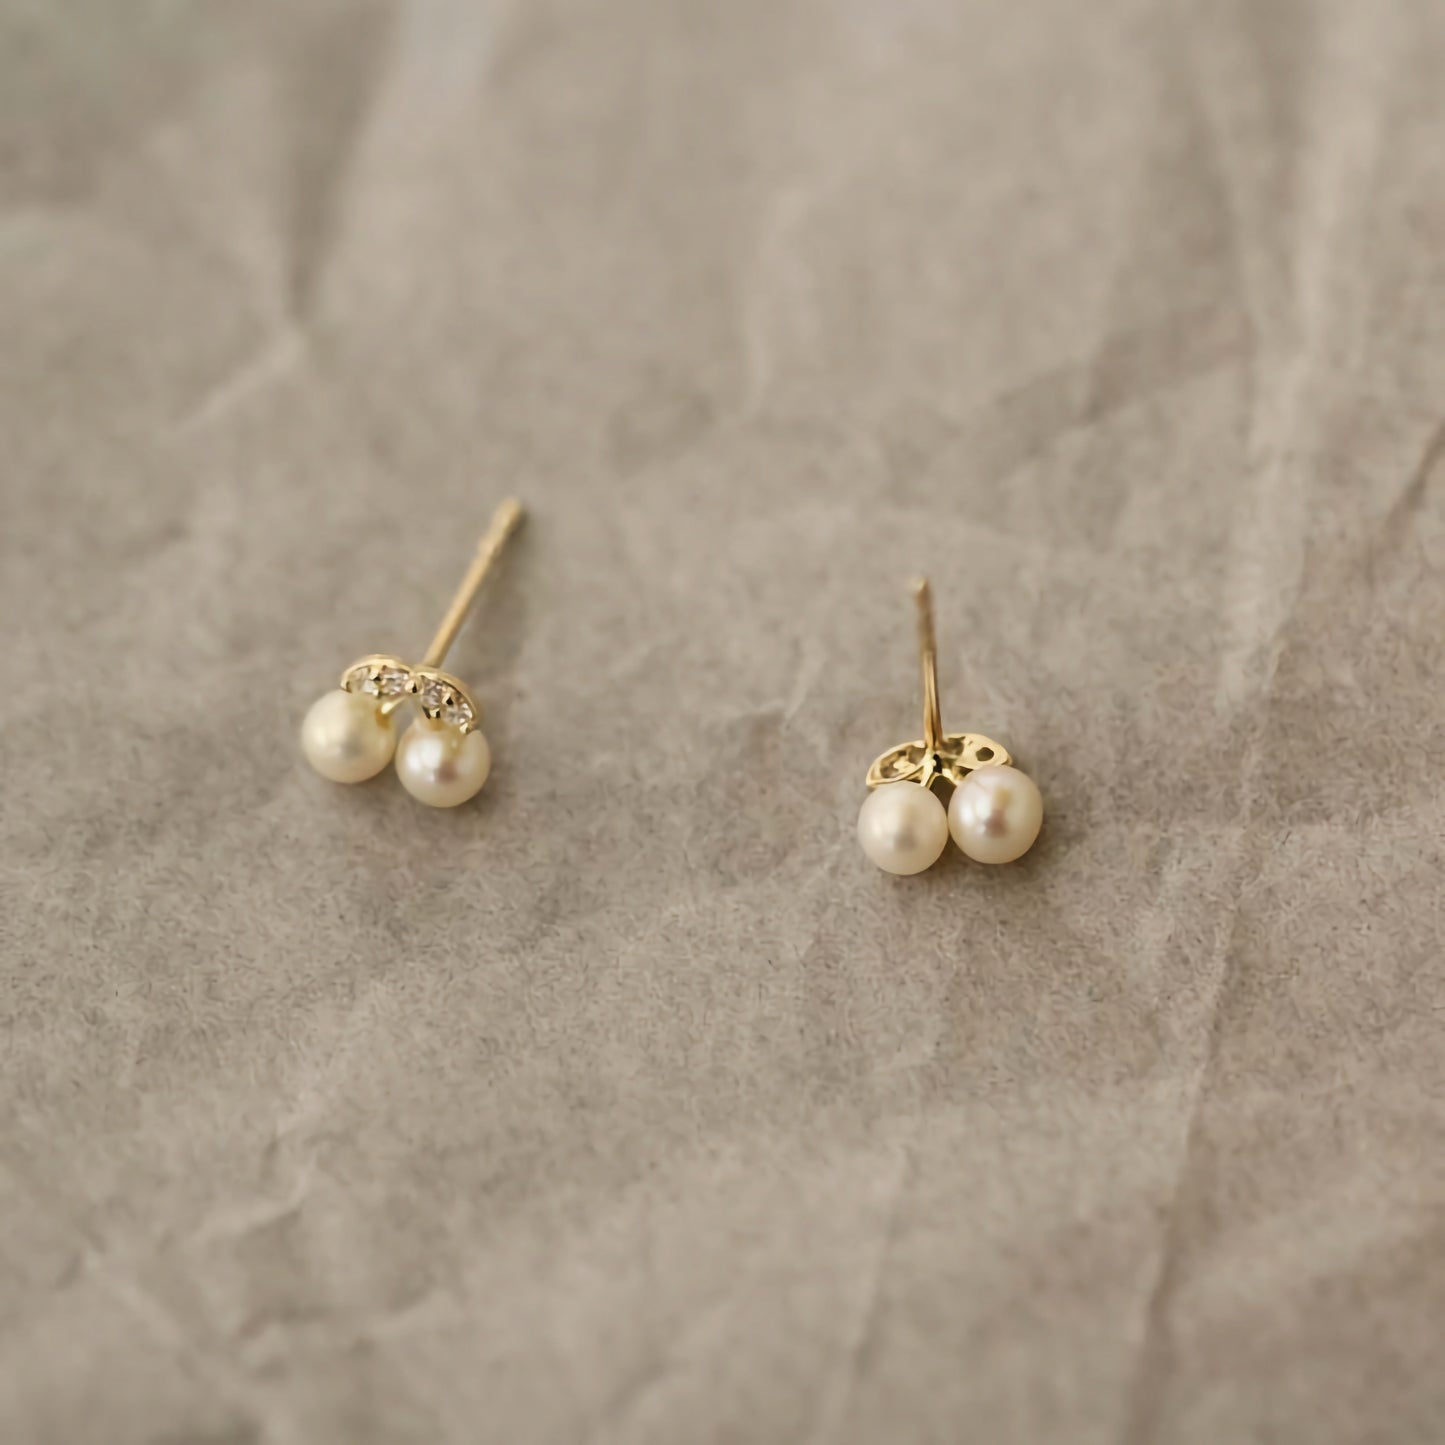 9ct solid gold earrings in the shape of cherries, where pearls serve as the fruit, emphasizing their charm and unique design.